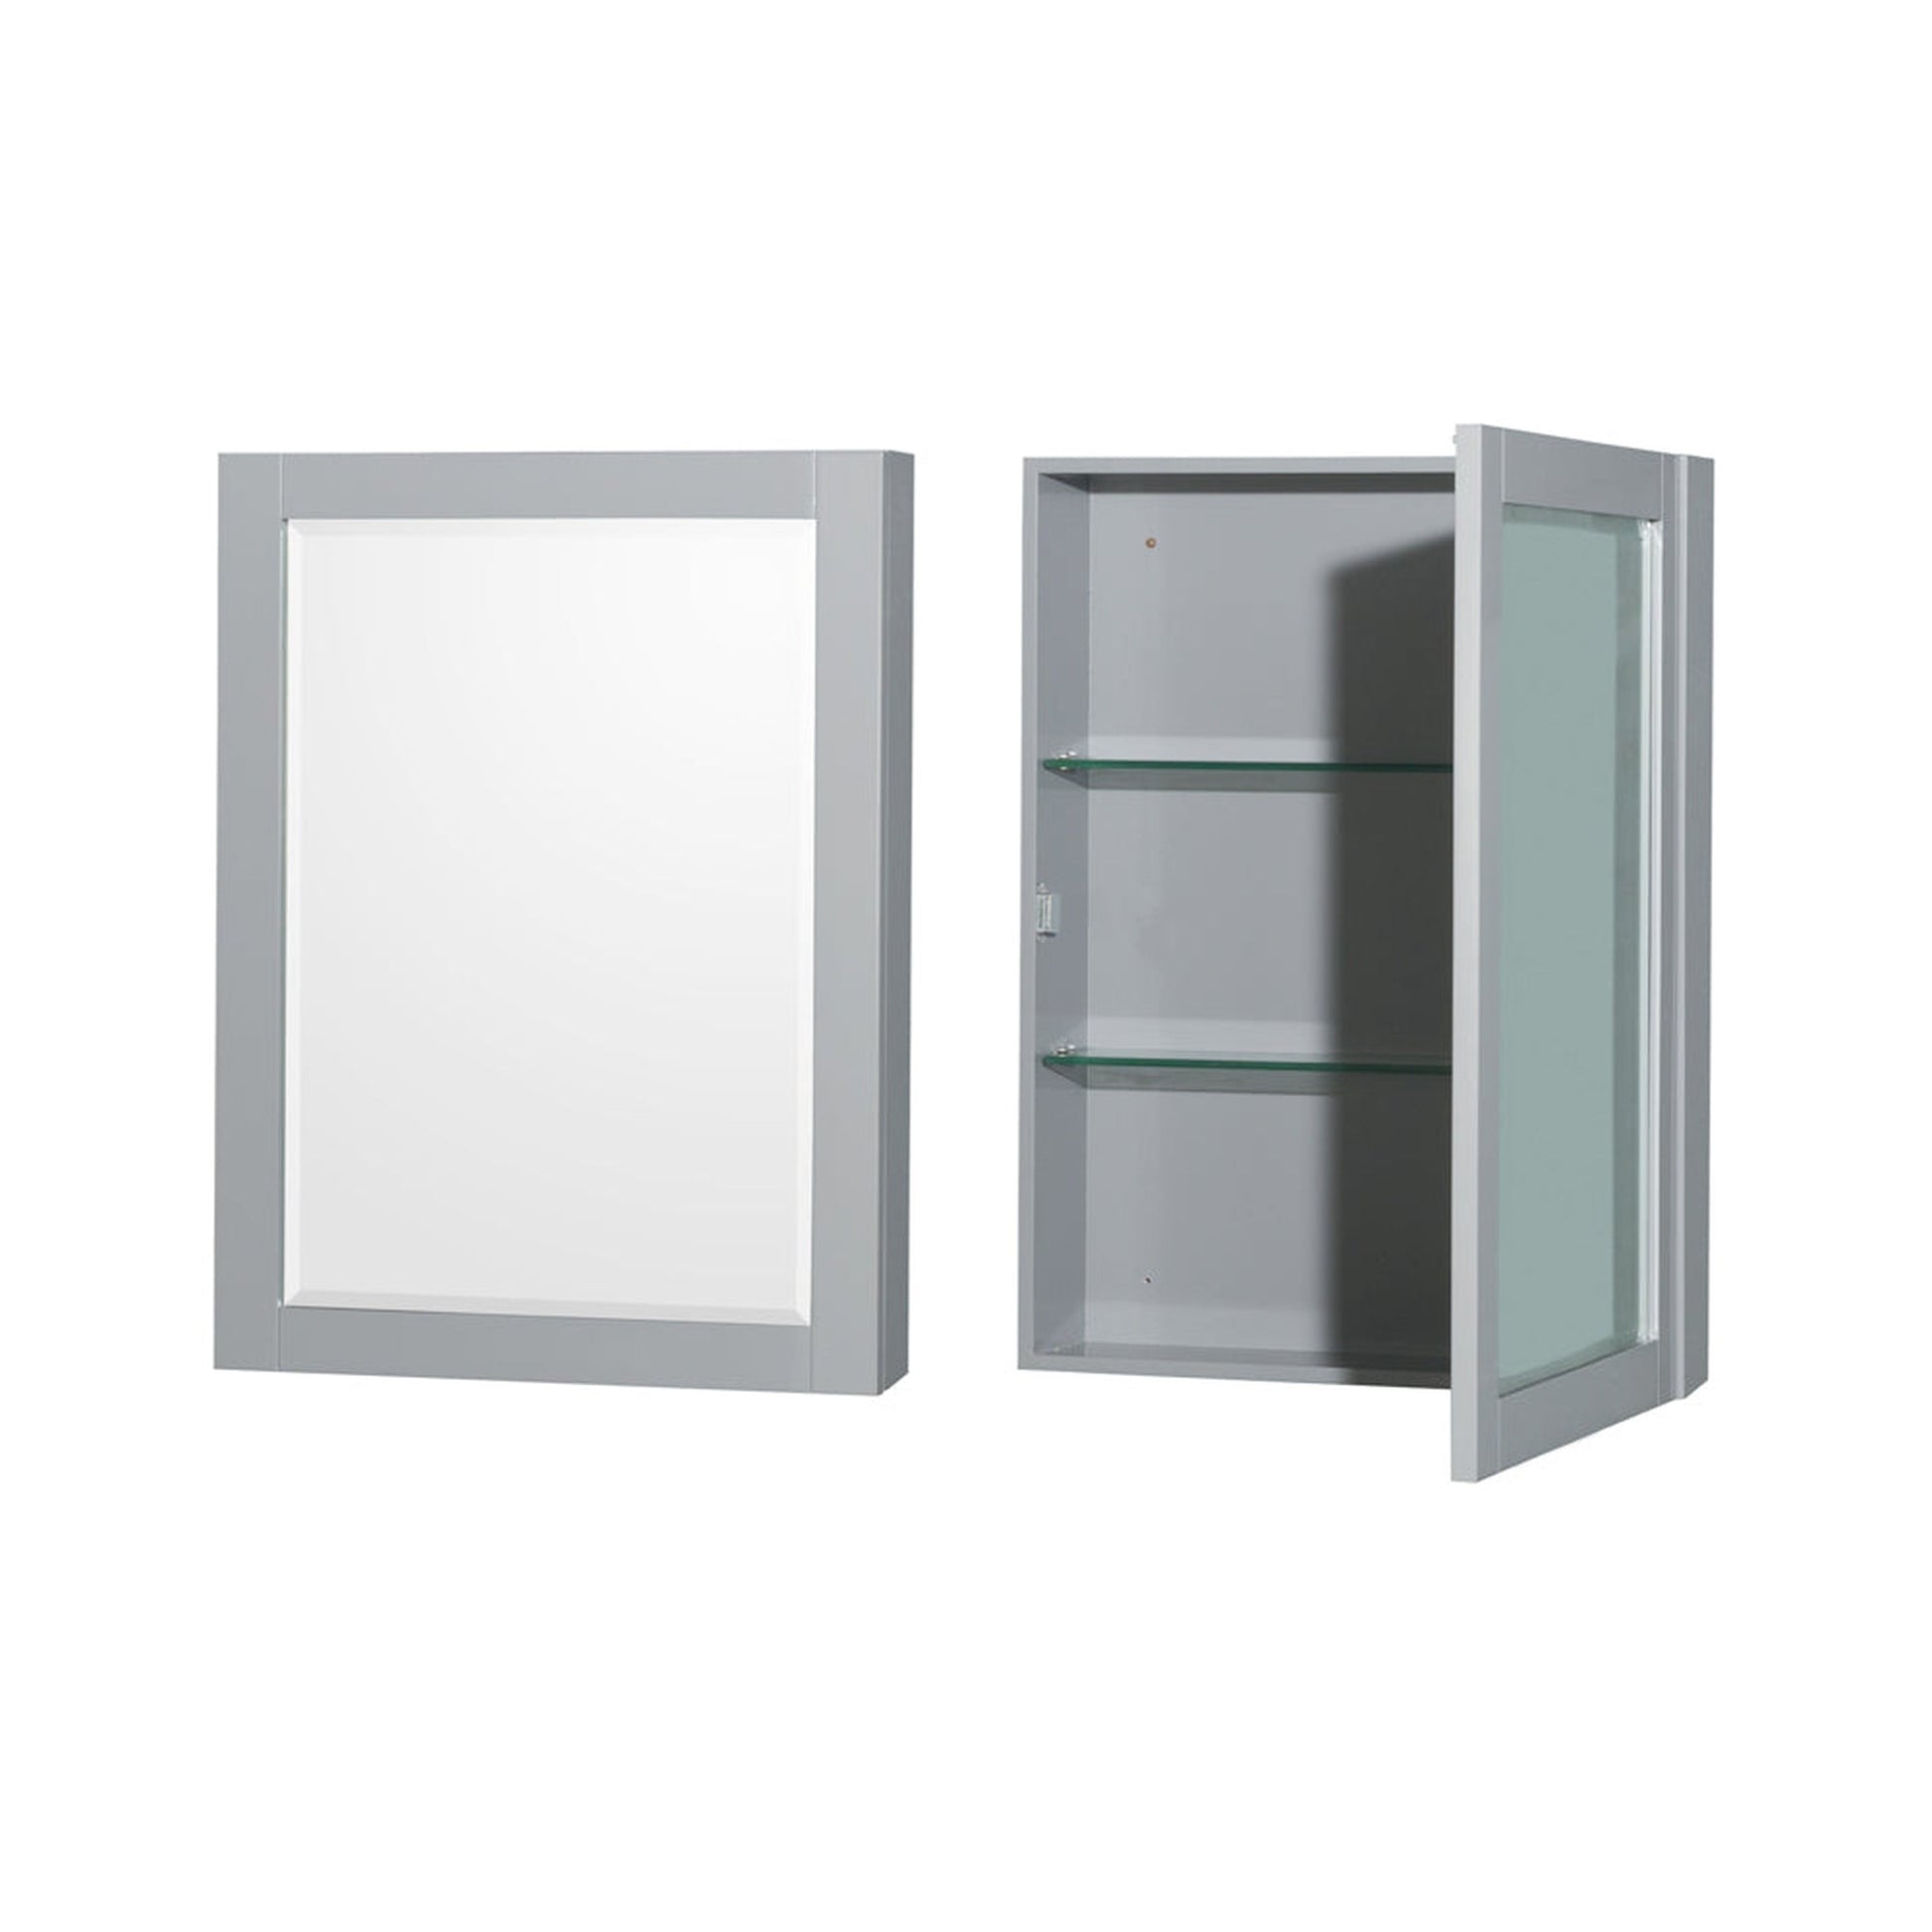 Wyndham Collection Sheffield 60" Double Bathroom Vanity in Gray, Carrara Cultured Marble Countertop, Undermount Square Sinks, Medicine Cabinet